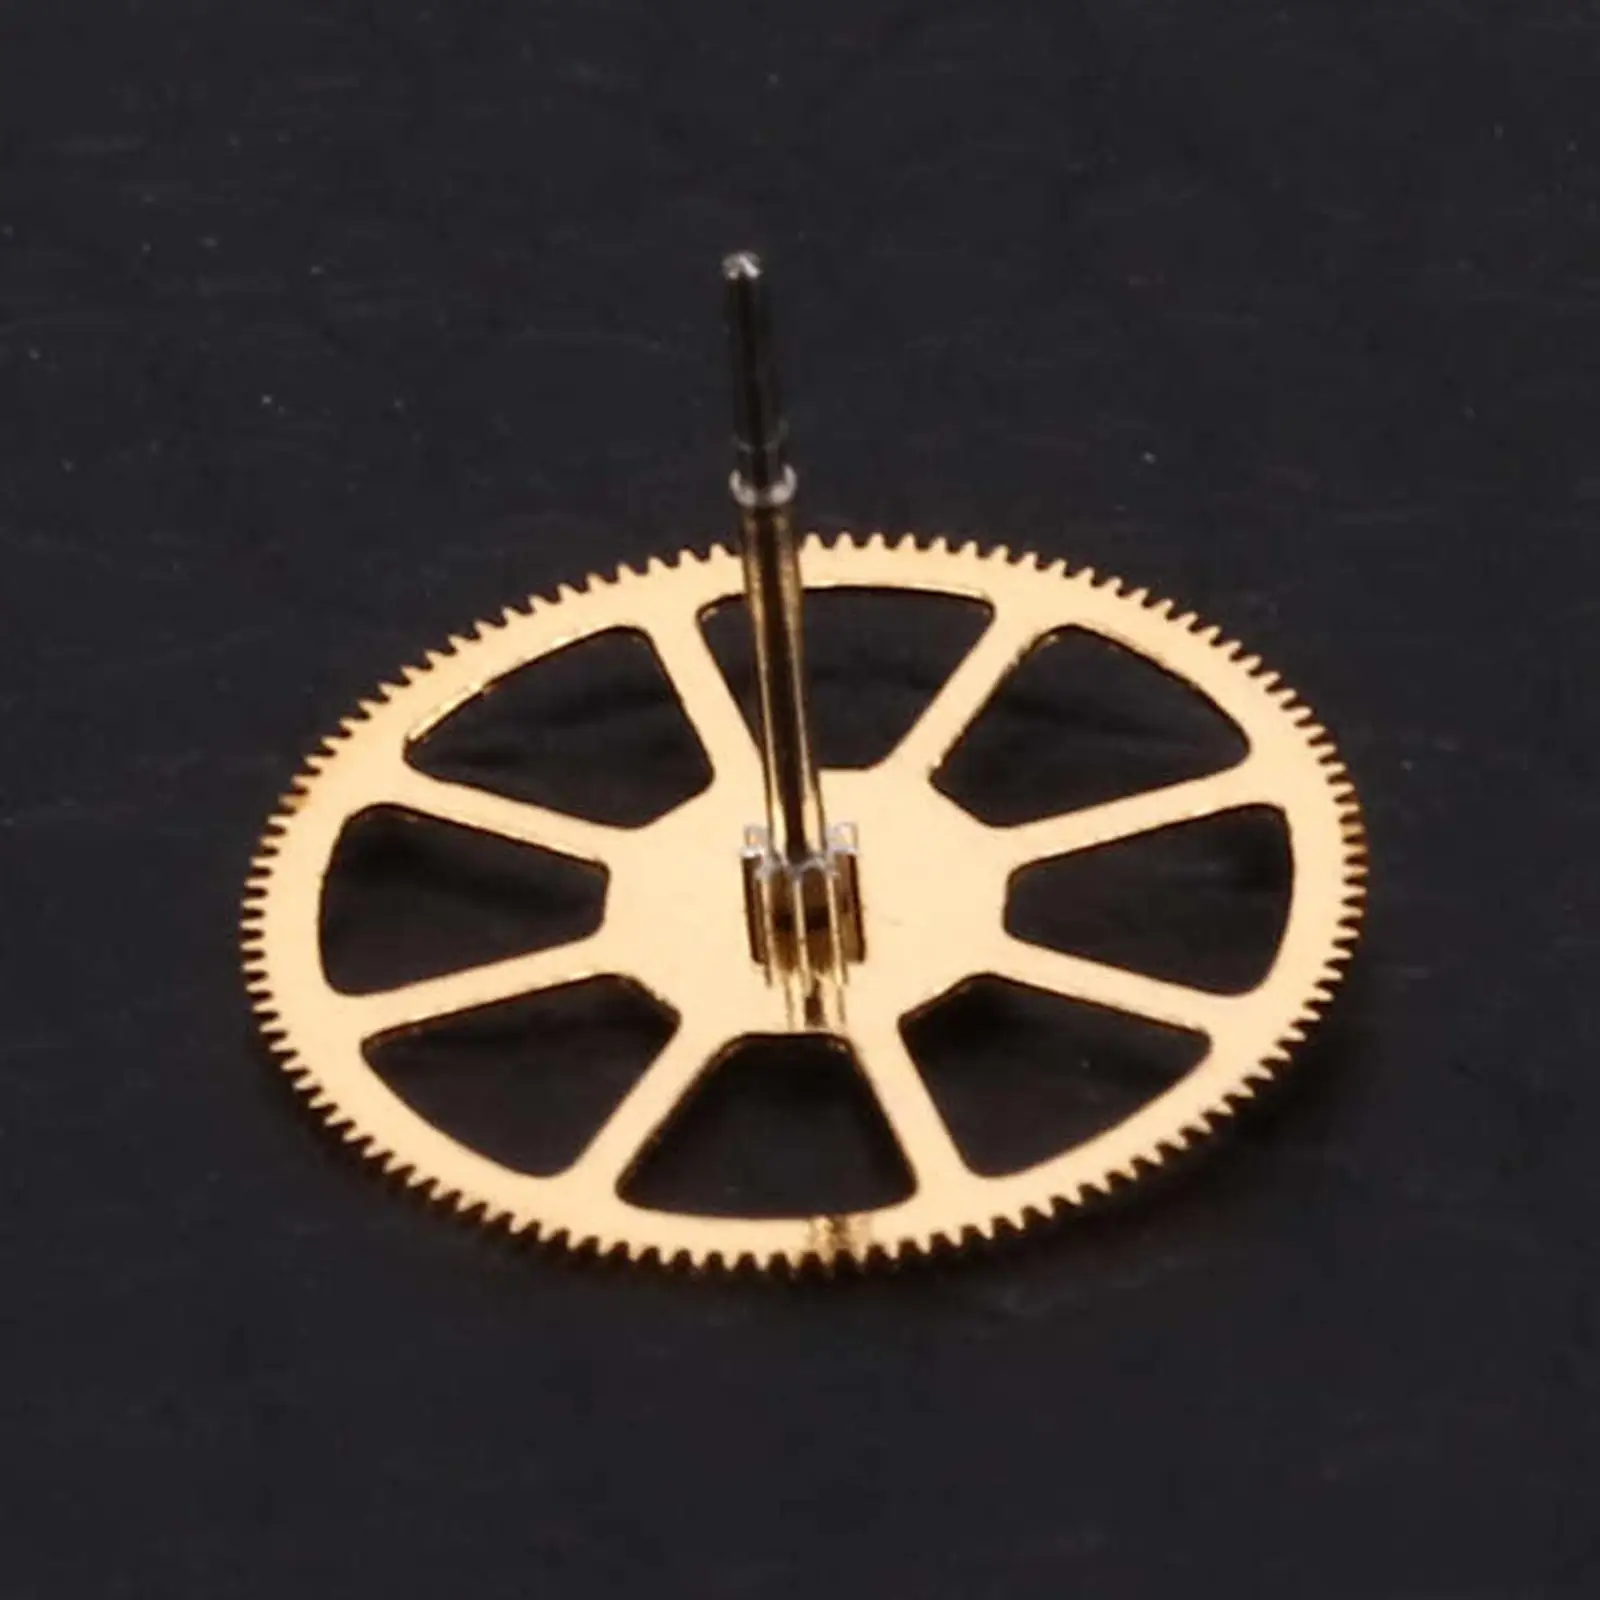 Metal Watch Second Wheel Movement Parts Watchmaker for 2836 Accessories